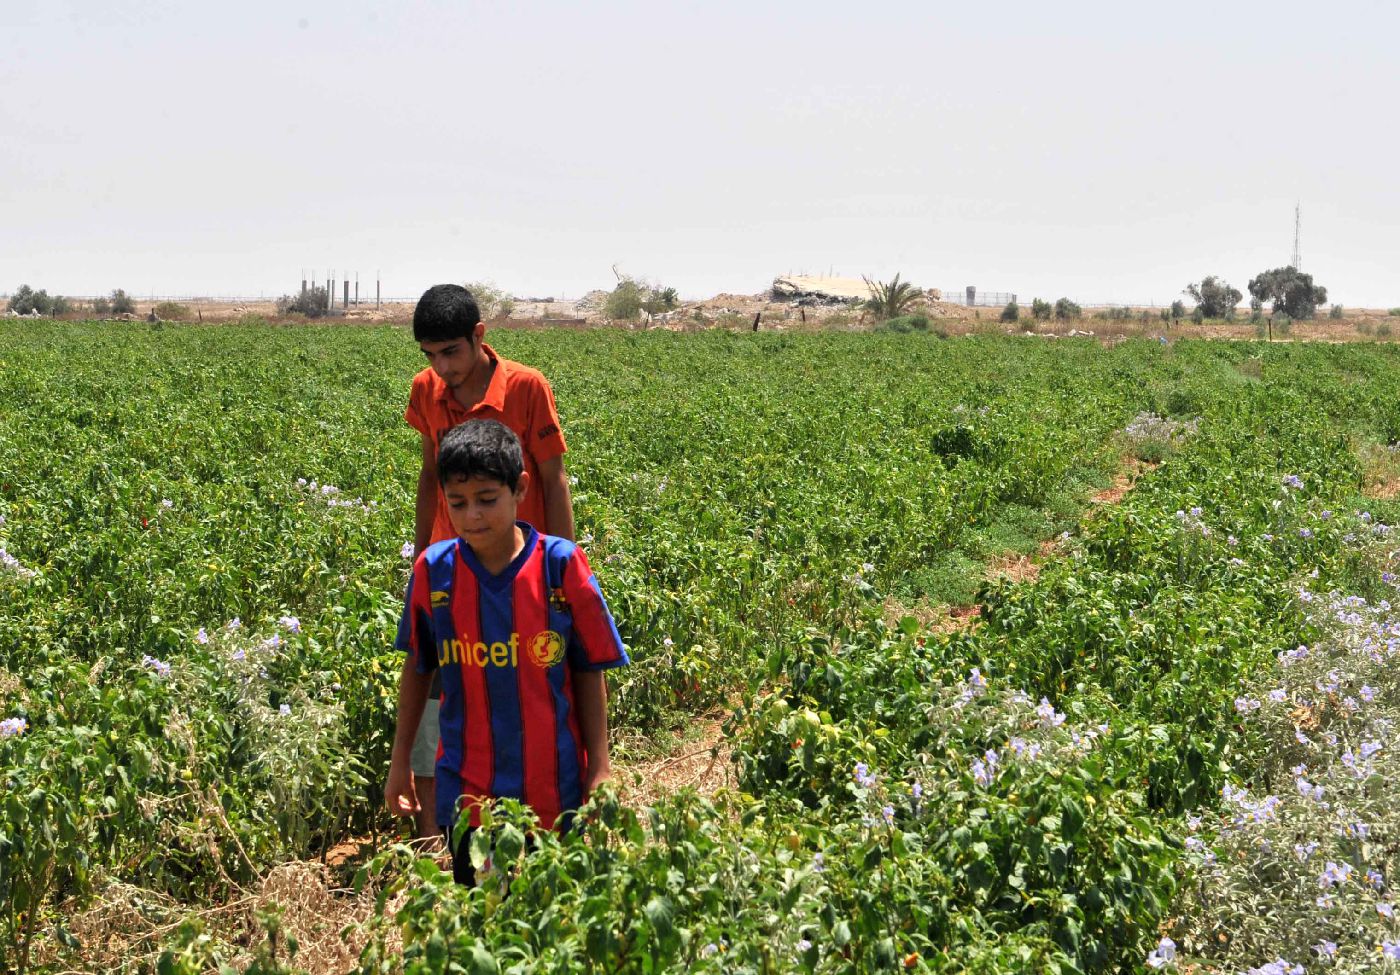 Palestinian children in agricultural field in the high risk area along the Gaza-Israel border fence, July 2010. Photo by Sherif Sarhan, WFP